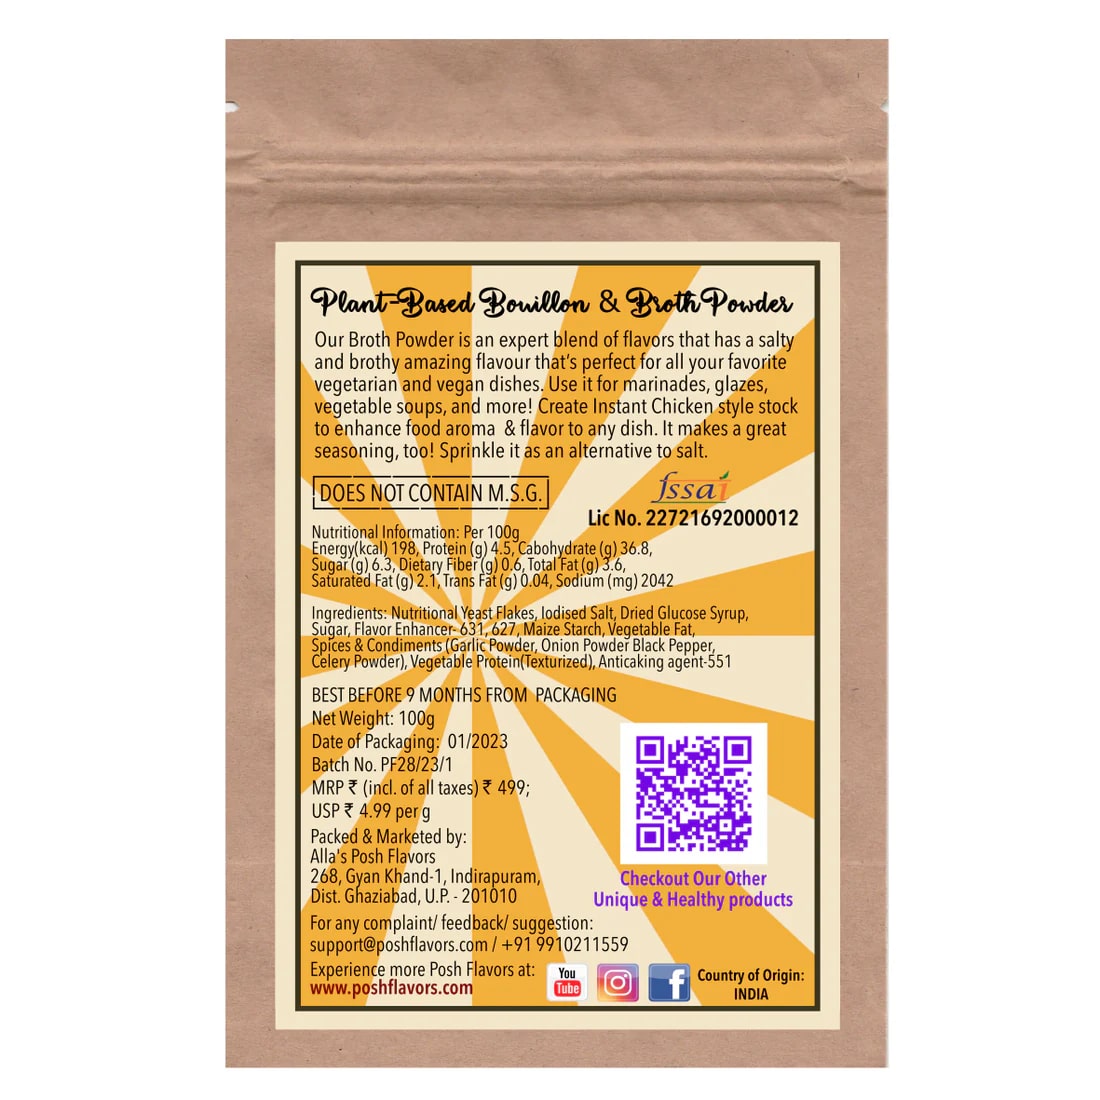 Vegan Bouillon & Broth Powder | 5 Individual Sachets | 5 litres of Soup Stock | Instant Chicken Style Stock Powder | 100% Vegan | NO MSG | Fortified with Nutritional Yeast Flakes